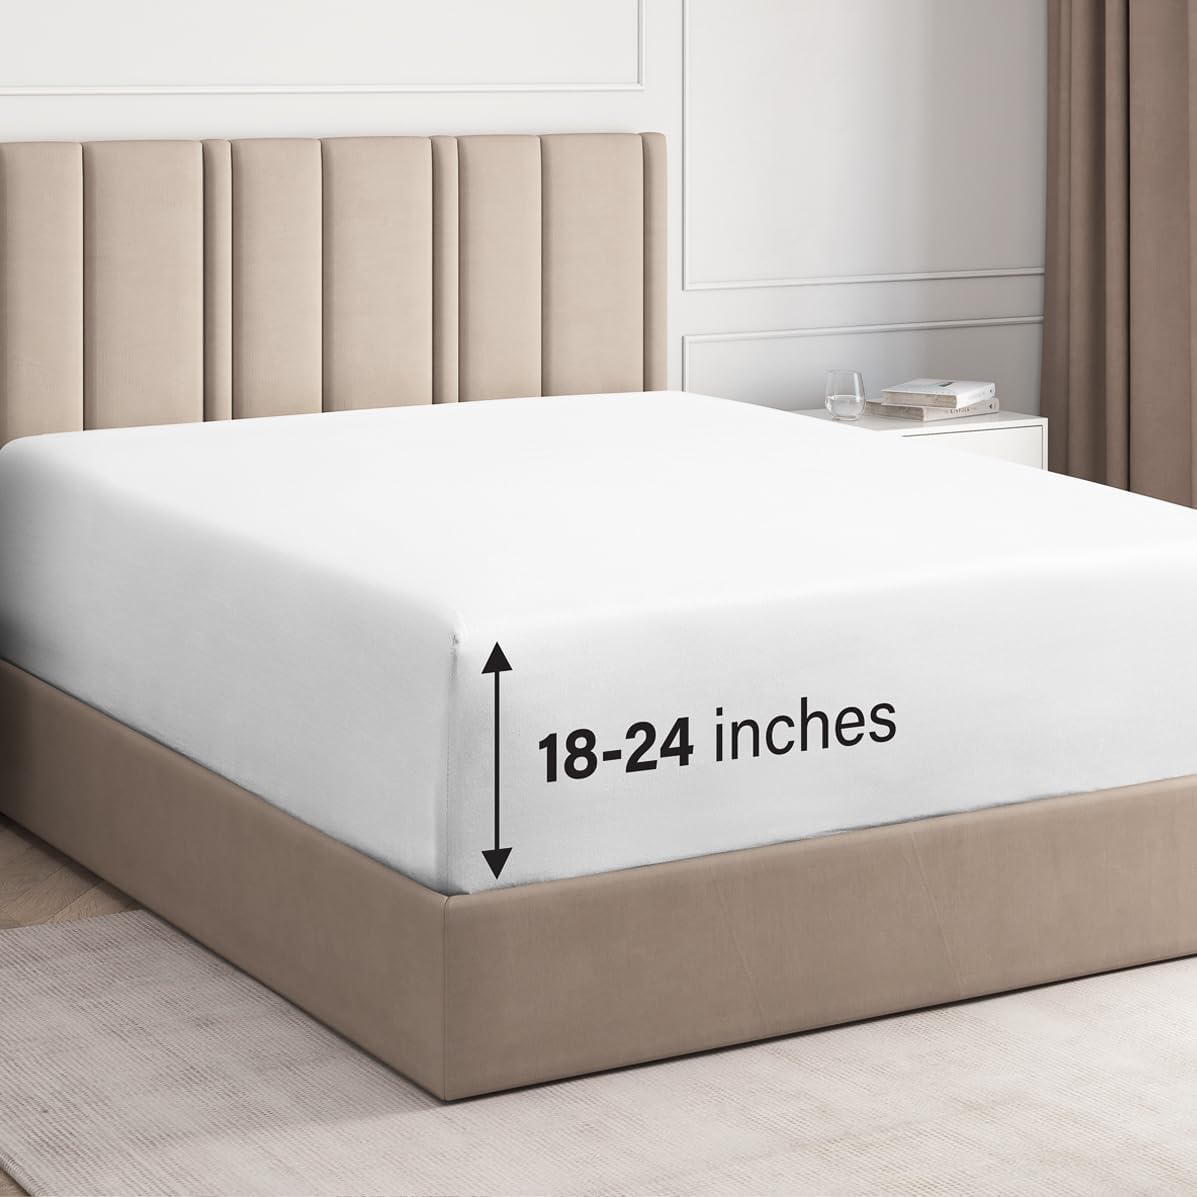 tes Deep Pocket Single Fitted Sheet - White